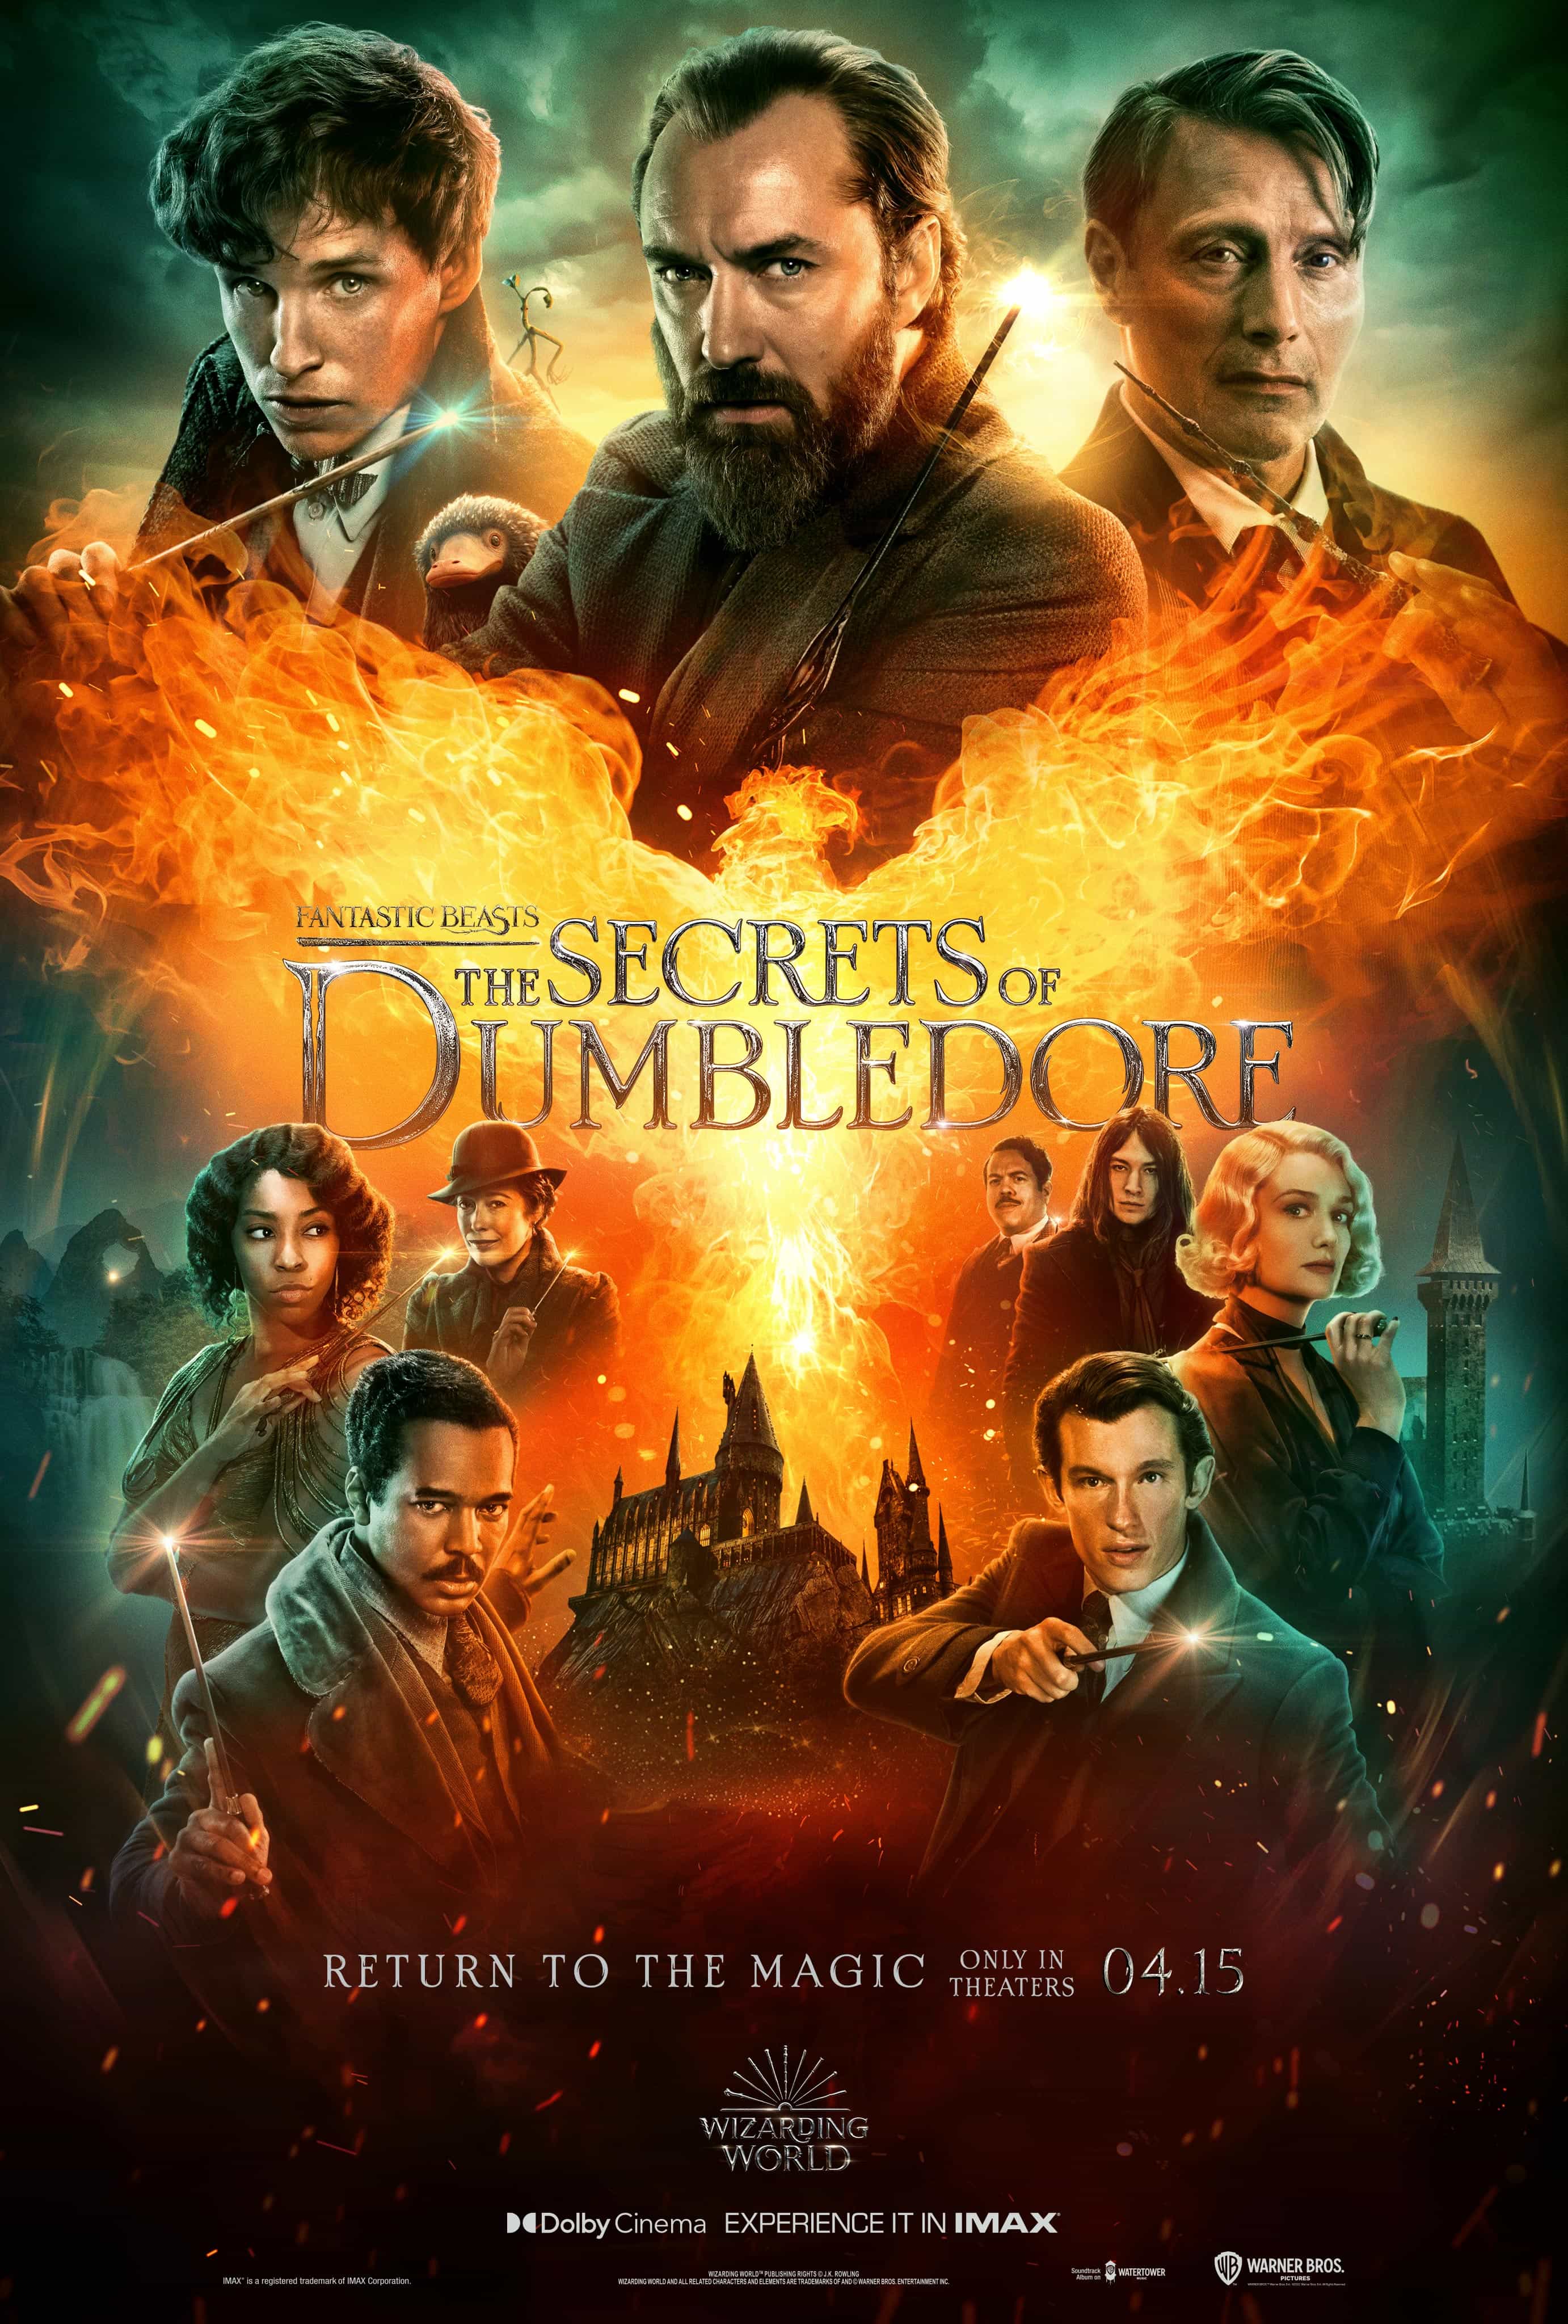 New poster released for Fantastic Beasts: The Secrets of Dumbledore starring Eddie Redmayne - movie UK release date 8th April 2022